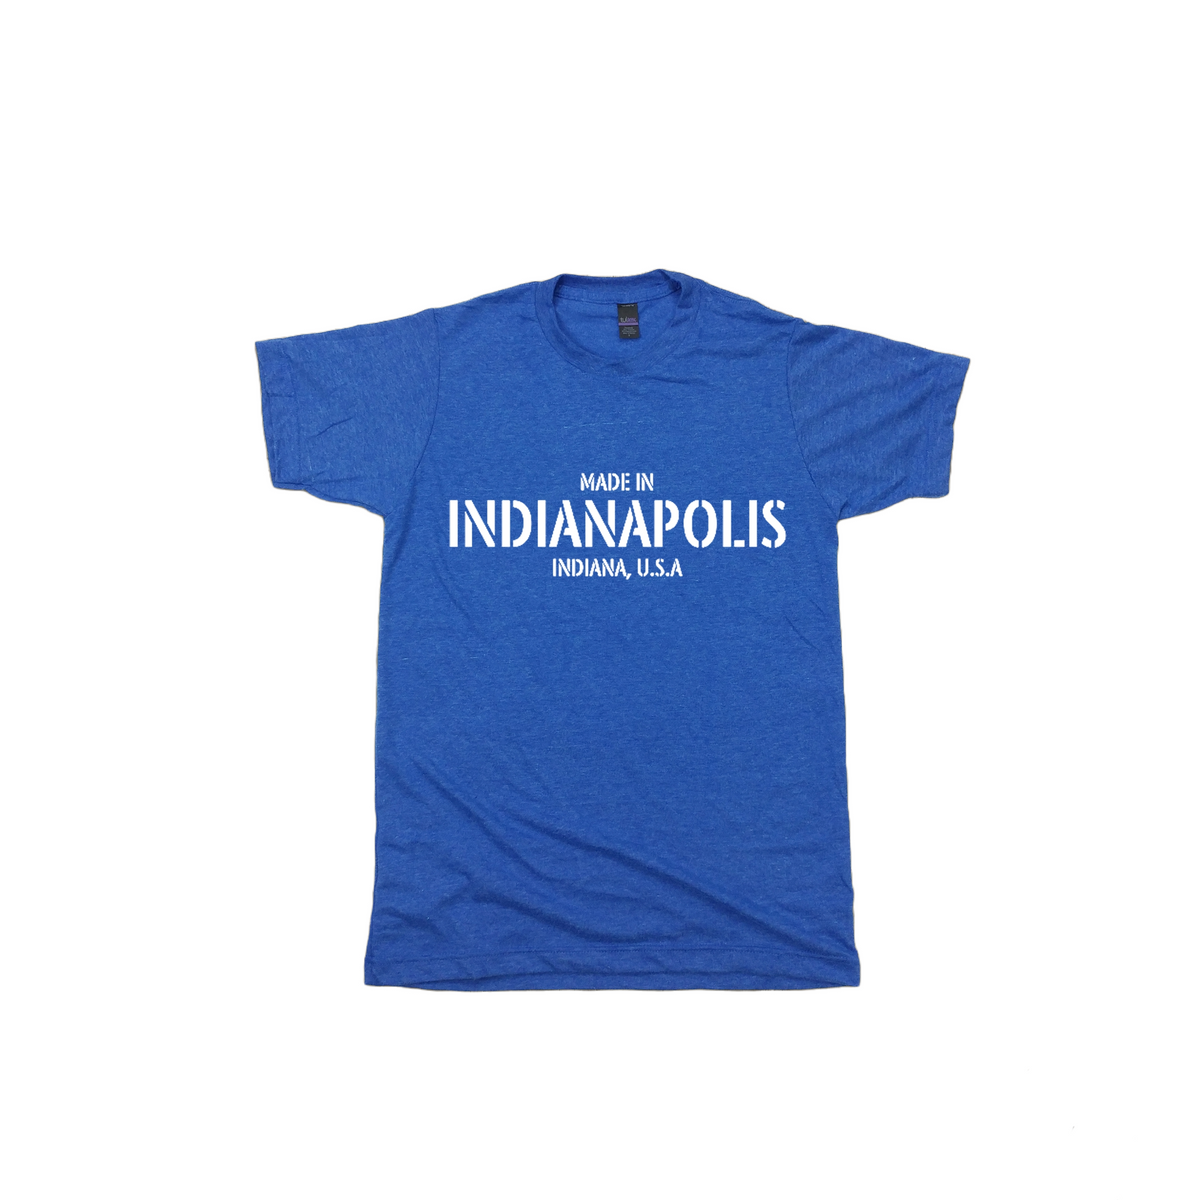 Made In Indianapolis - Youth Sizes